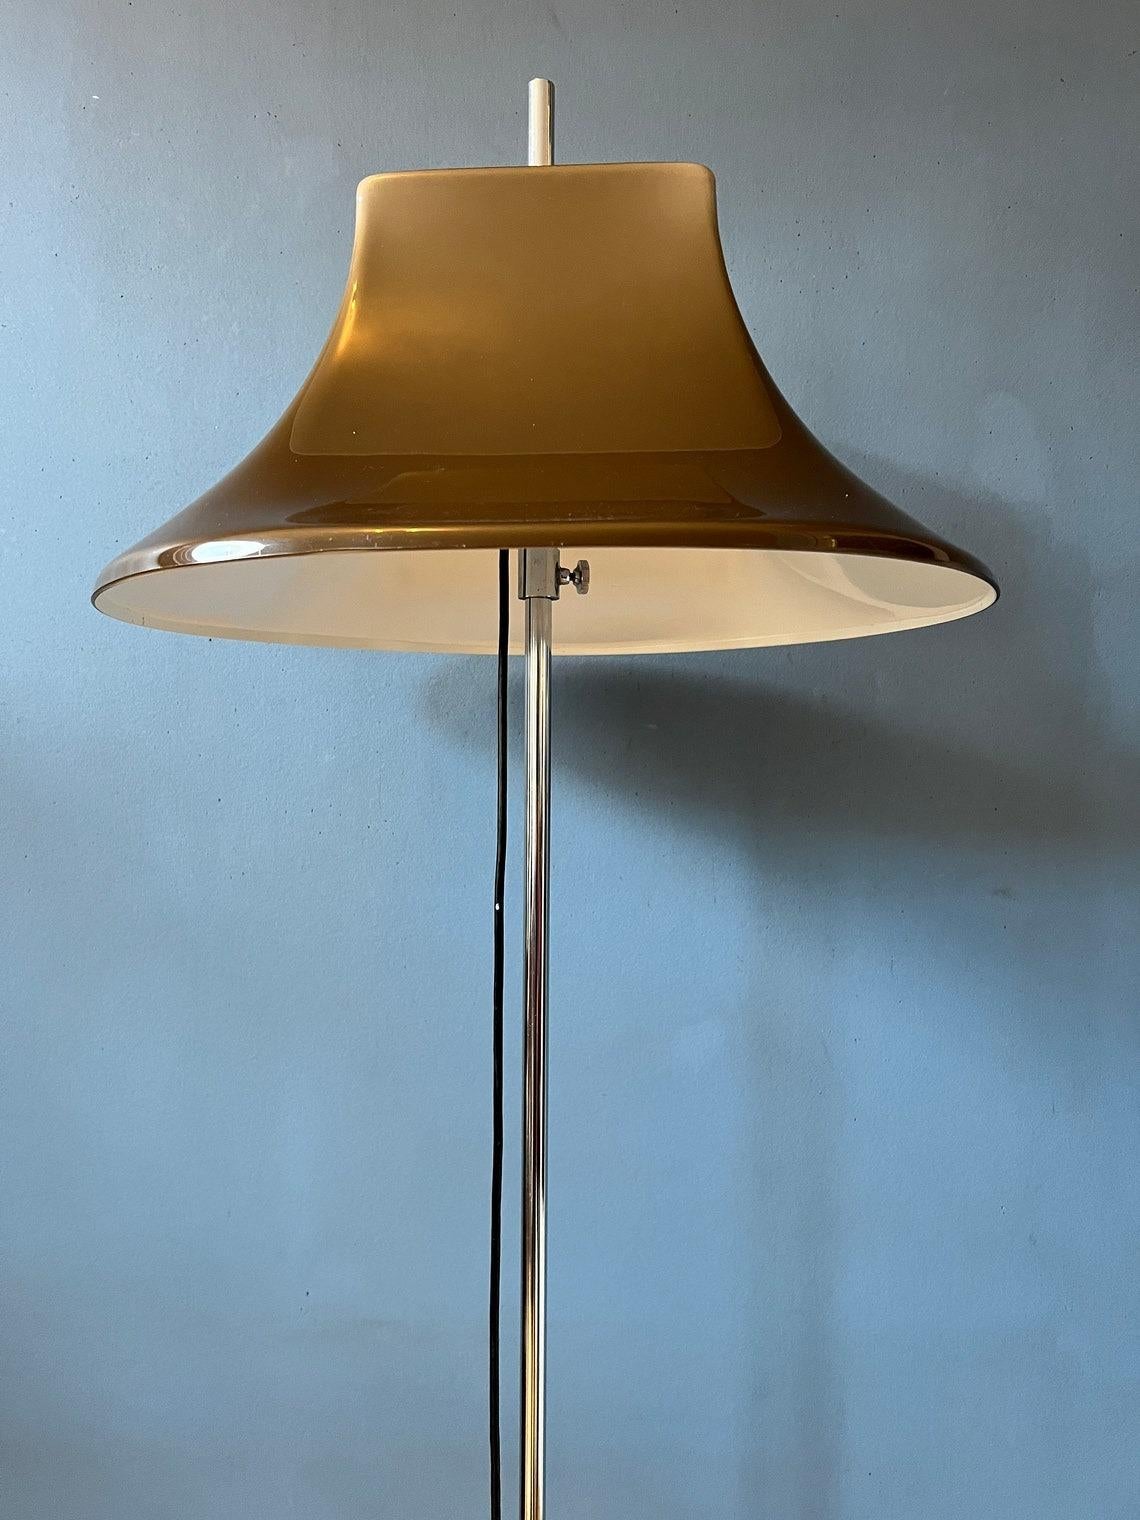 Willem Hagoort Space Age Floor Lamp with Beige Witch Hat Shade, 1970s For Sale 1